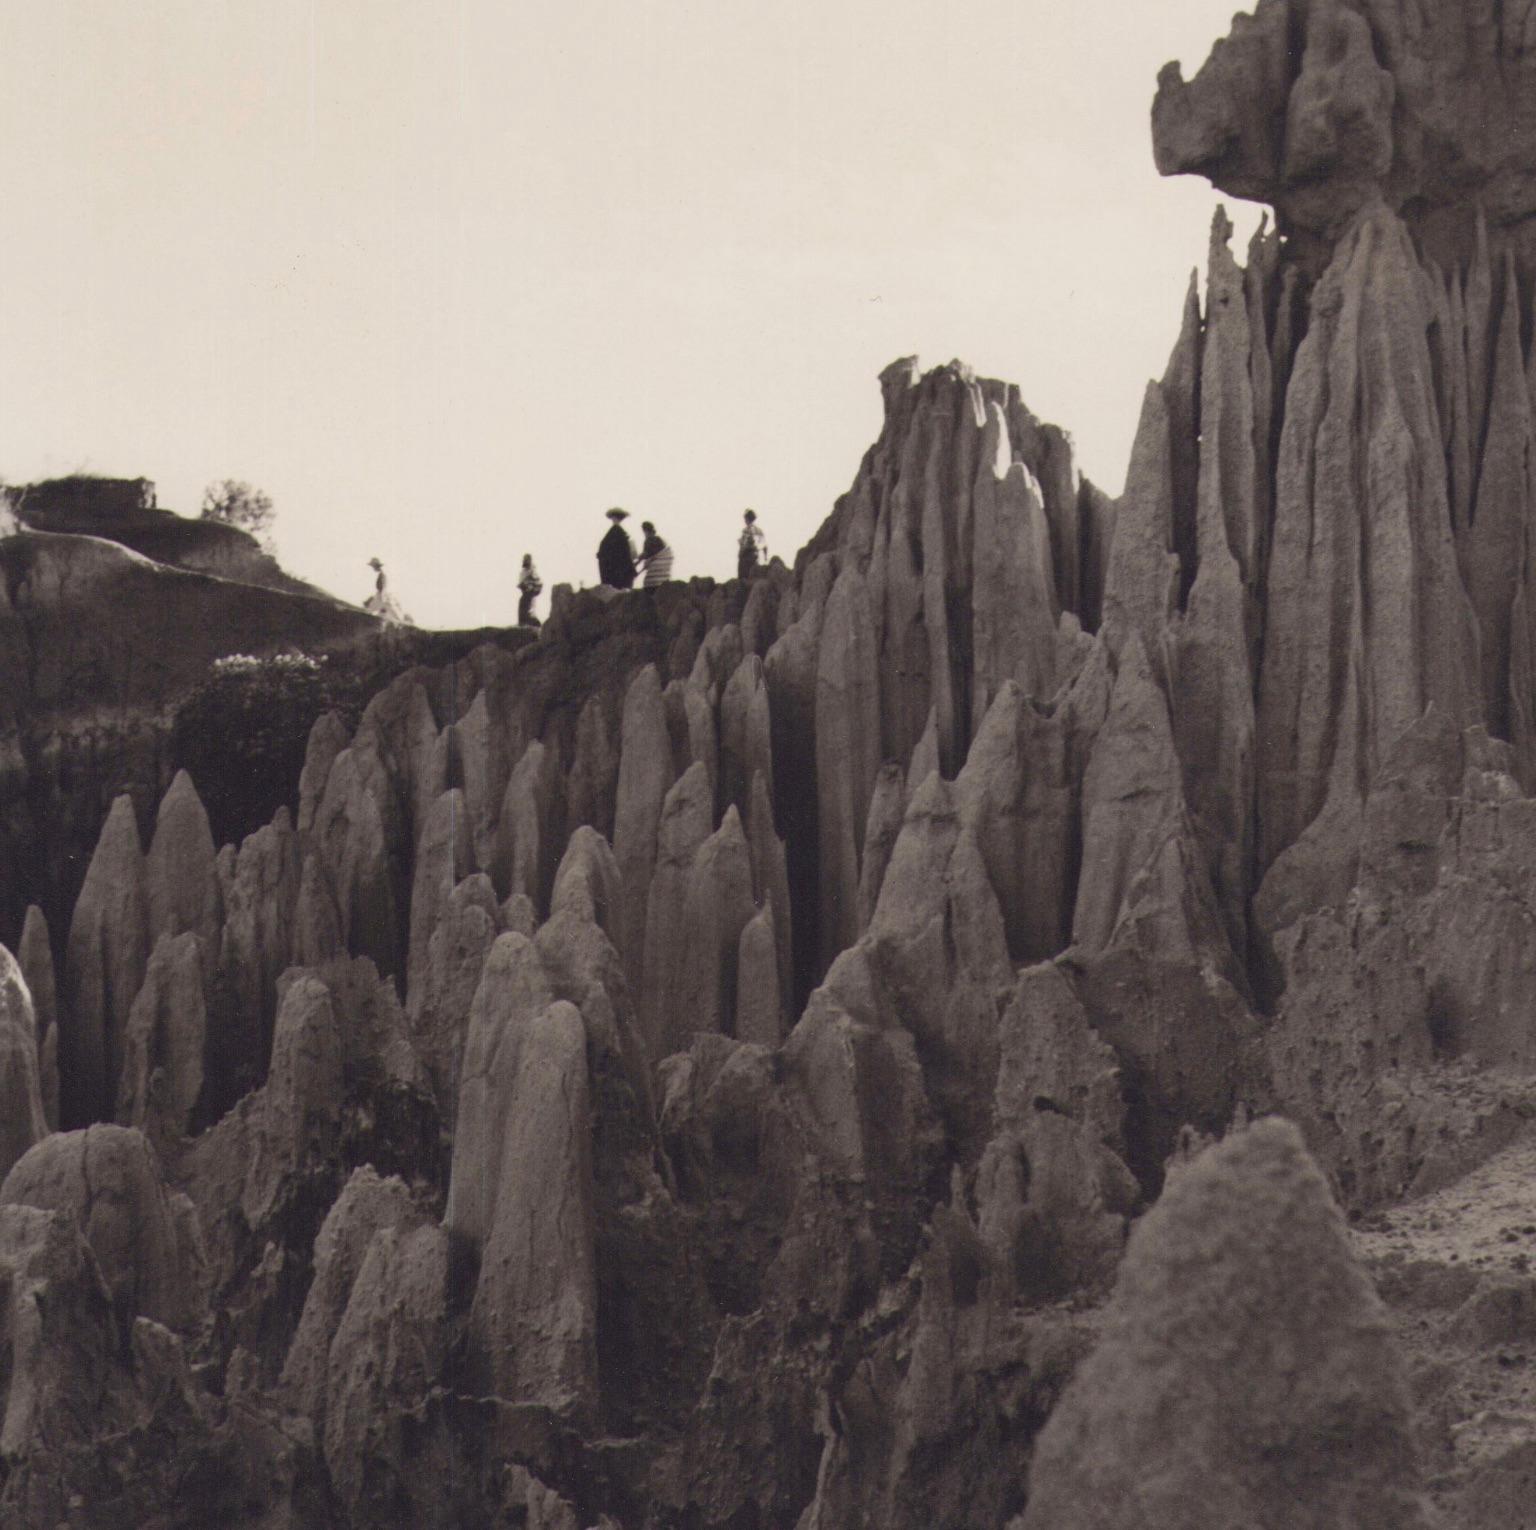 Guatemala, Nature, Black and Whit ephotography, ca. 1960s, 26, 1 x 24 cm - Photograph by Hanna Seidel